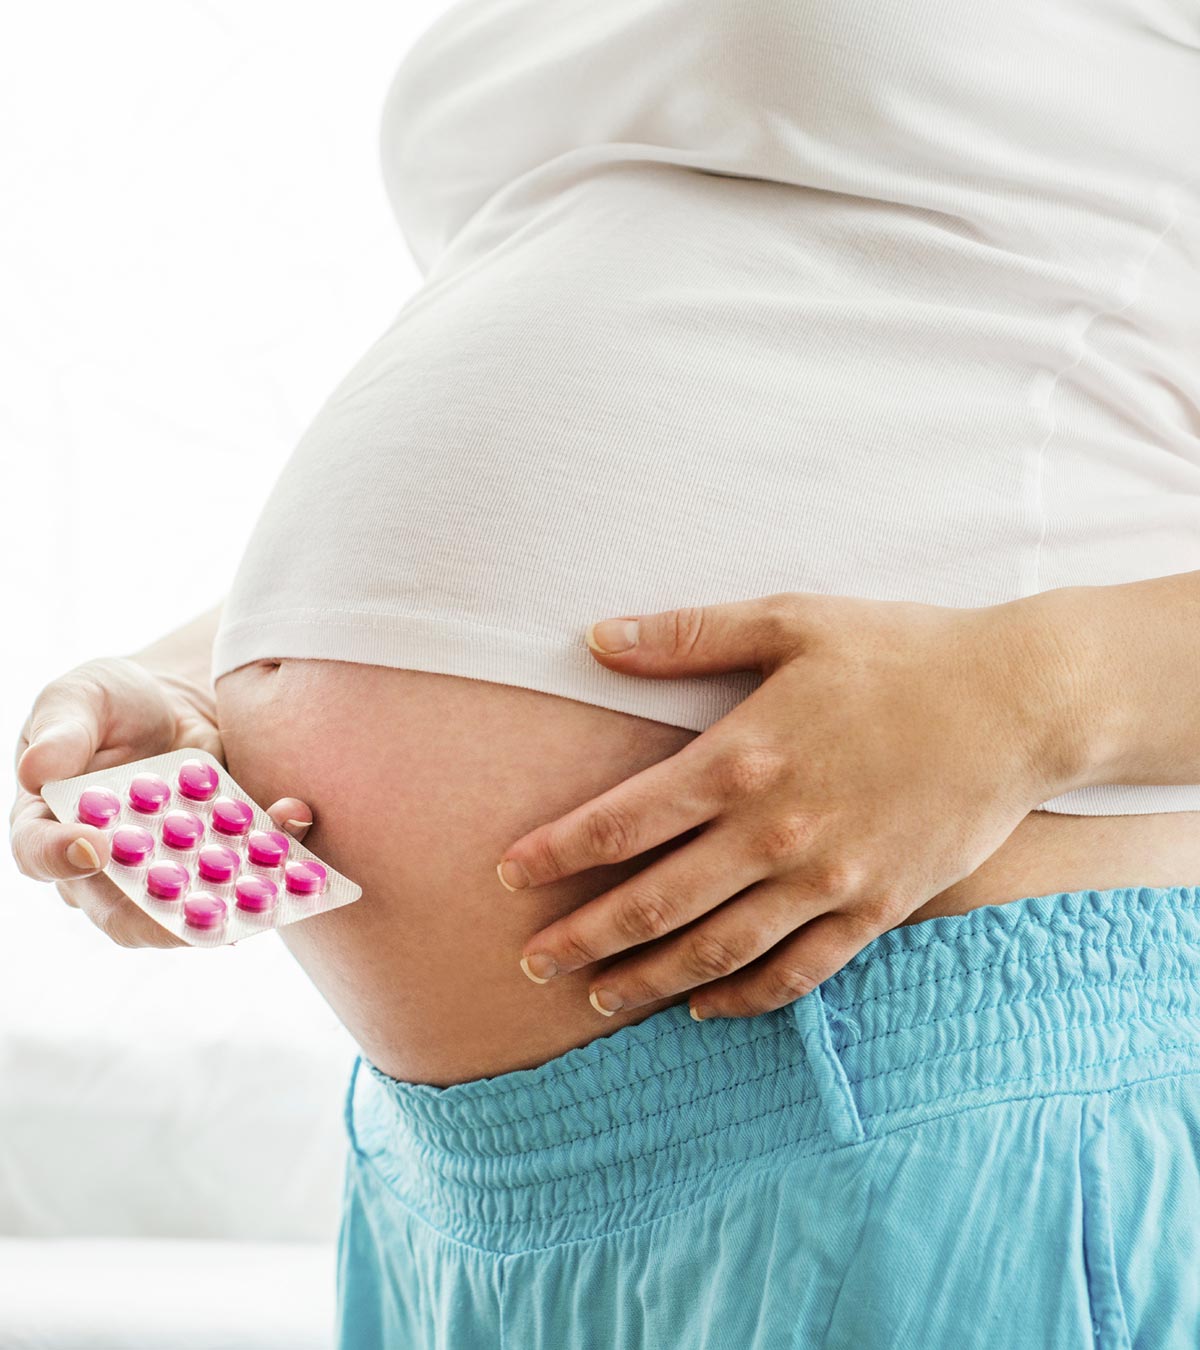 Is It Safe To Take Propranolol During Pregnancy?